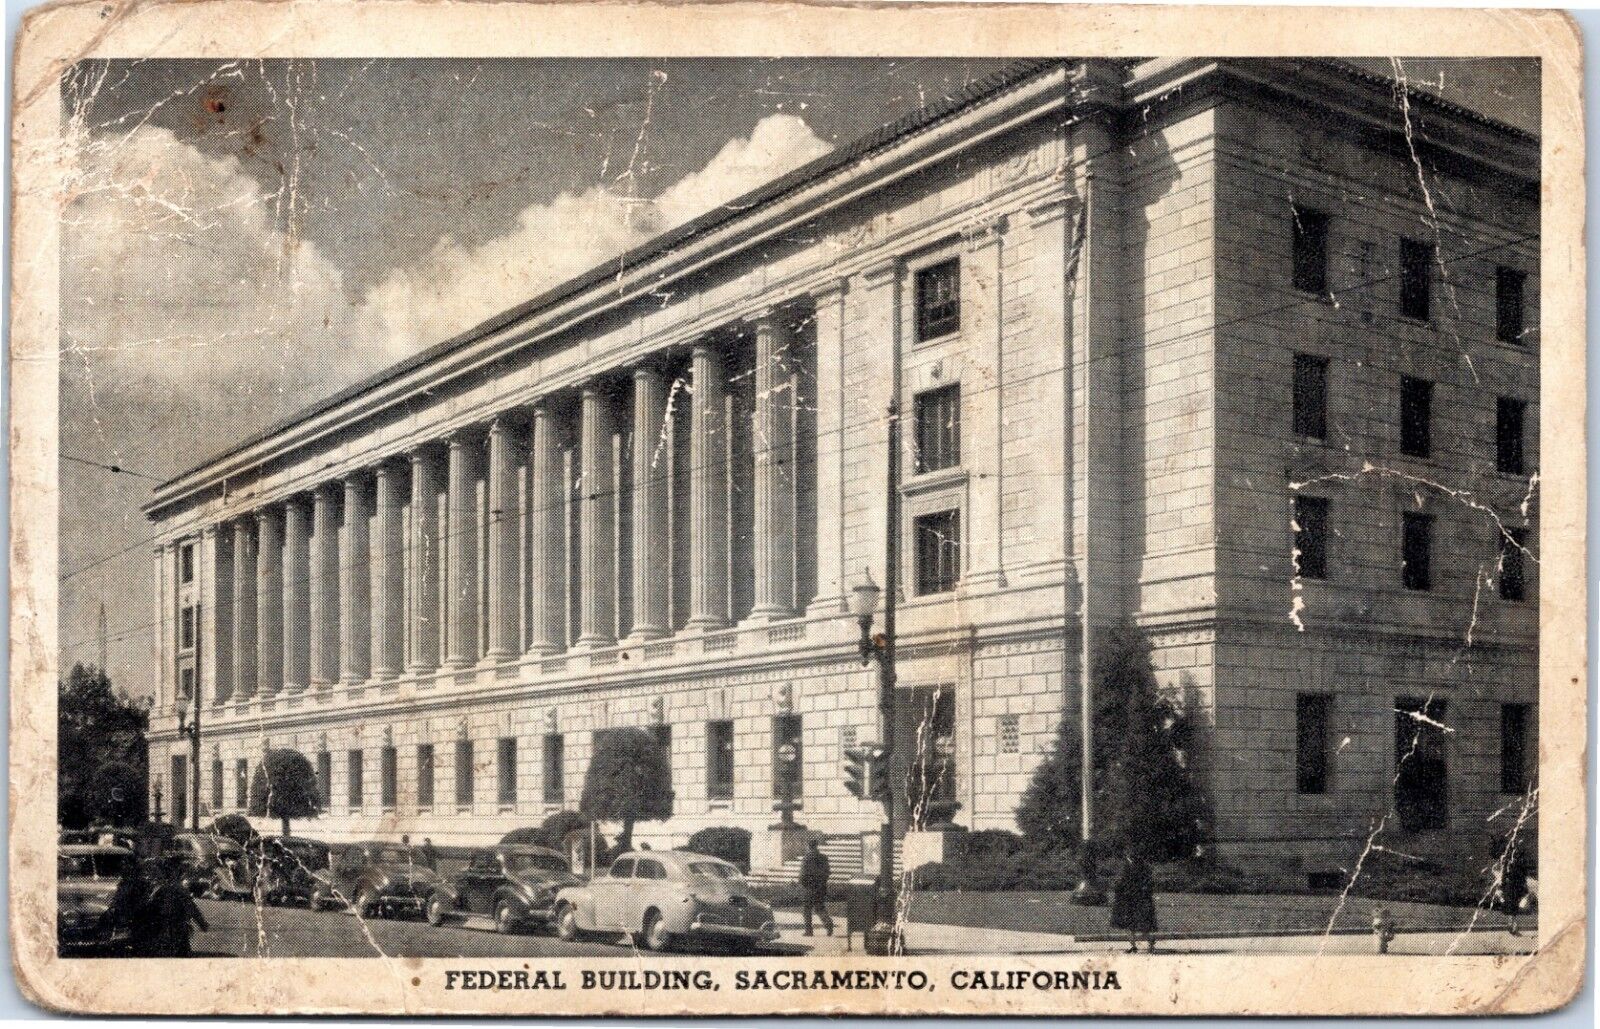 Sacremento CA Federal Building - Post Office 1940 cars - Red Cross slogan cancel